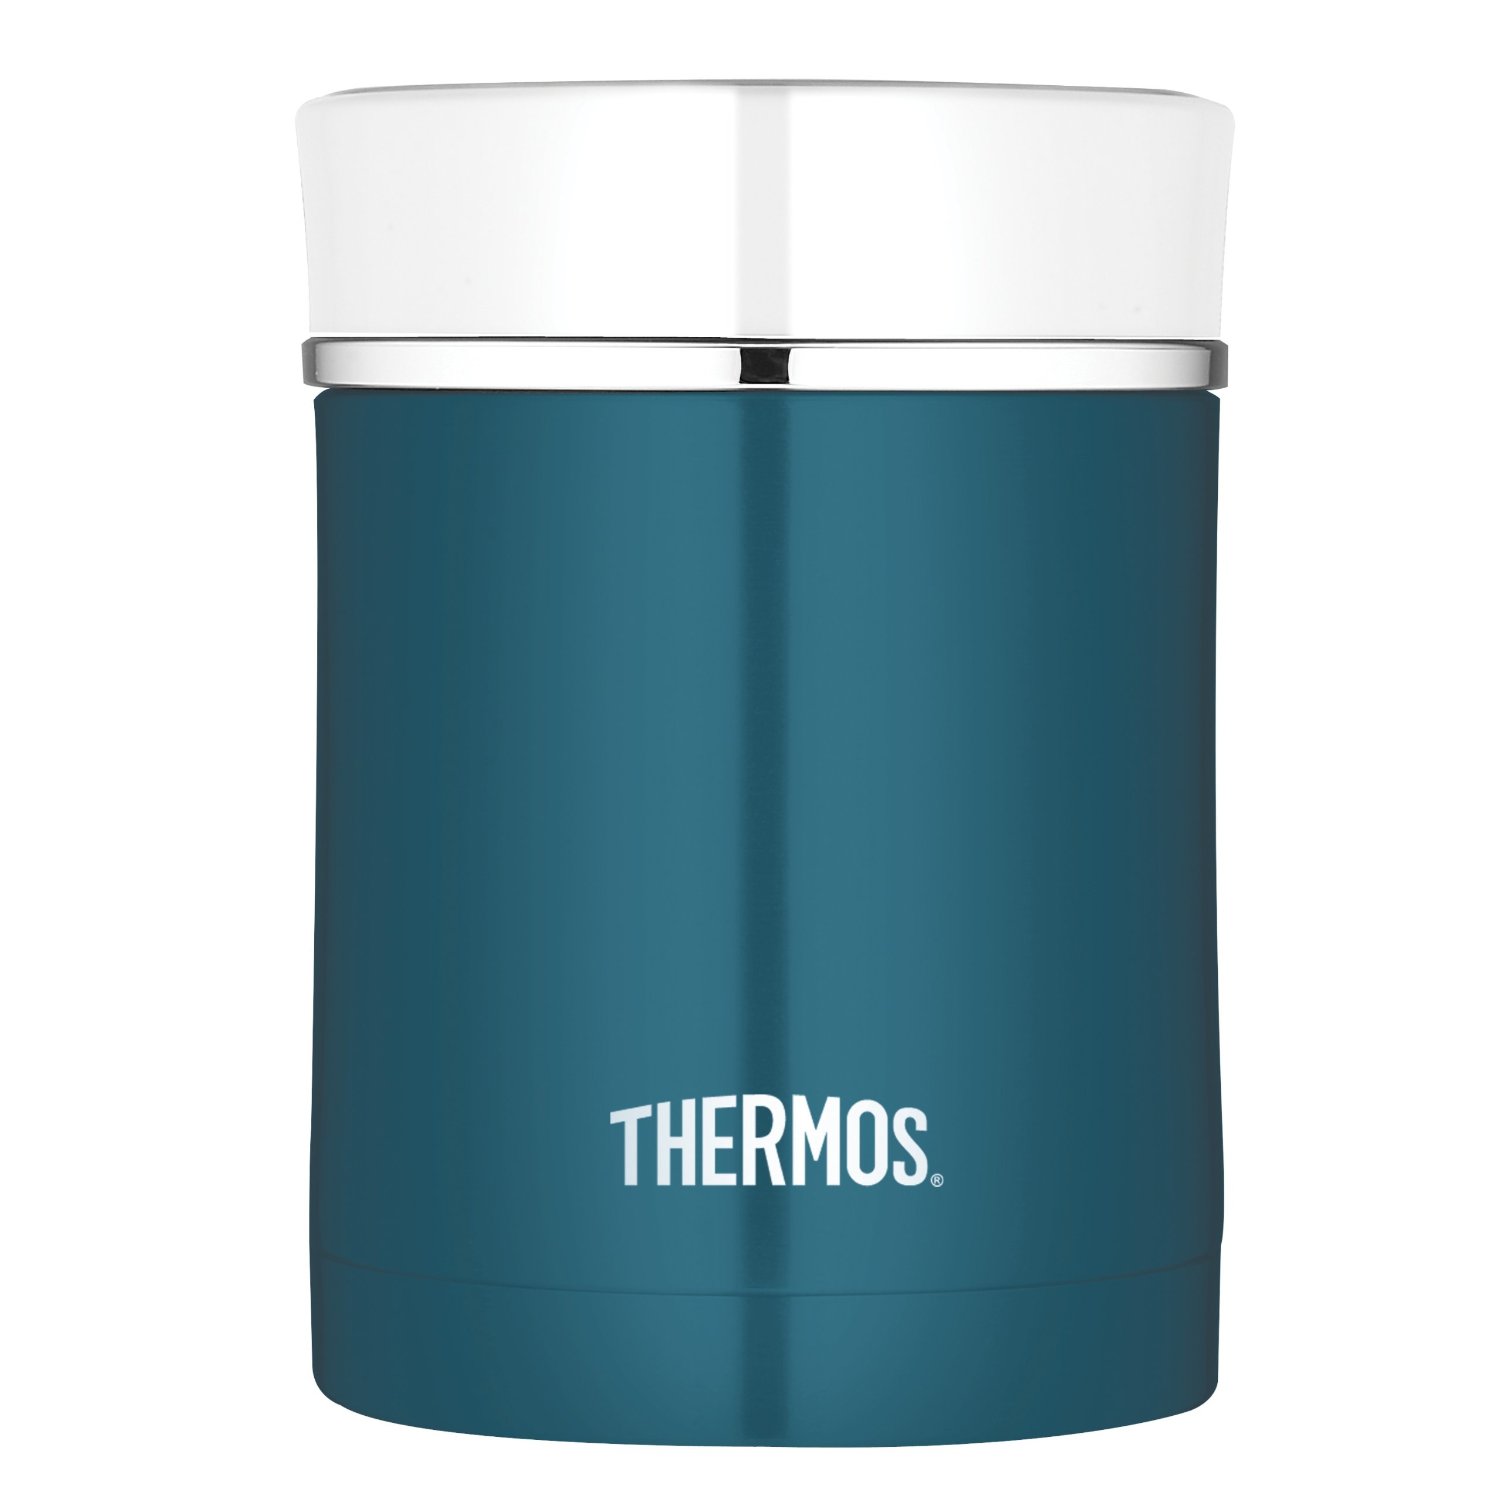 Thermos Sipp 16 Ounce Stainless Steel Food Jar, Teal $14.89